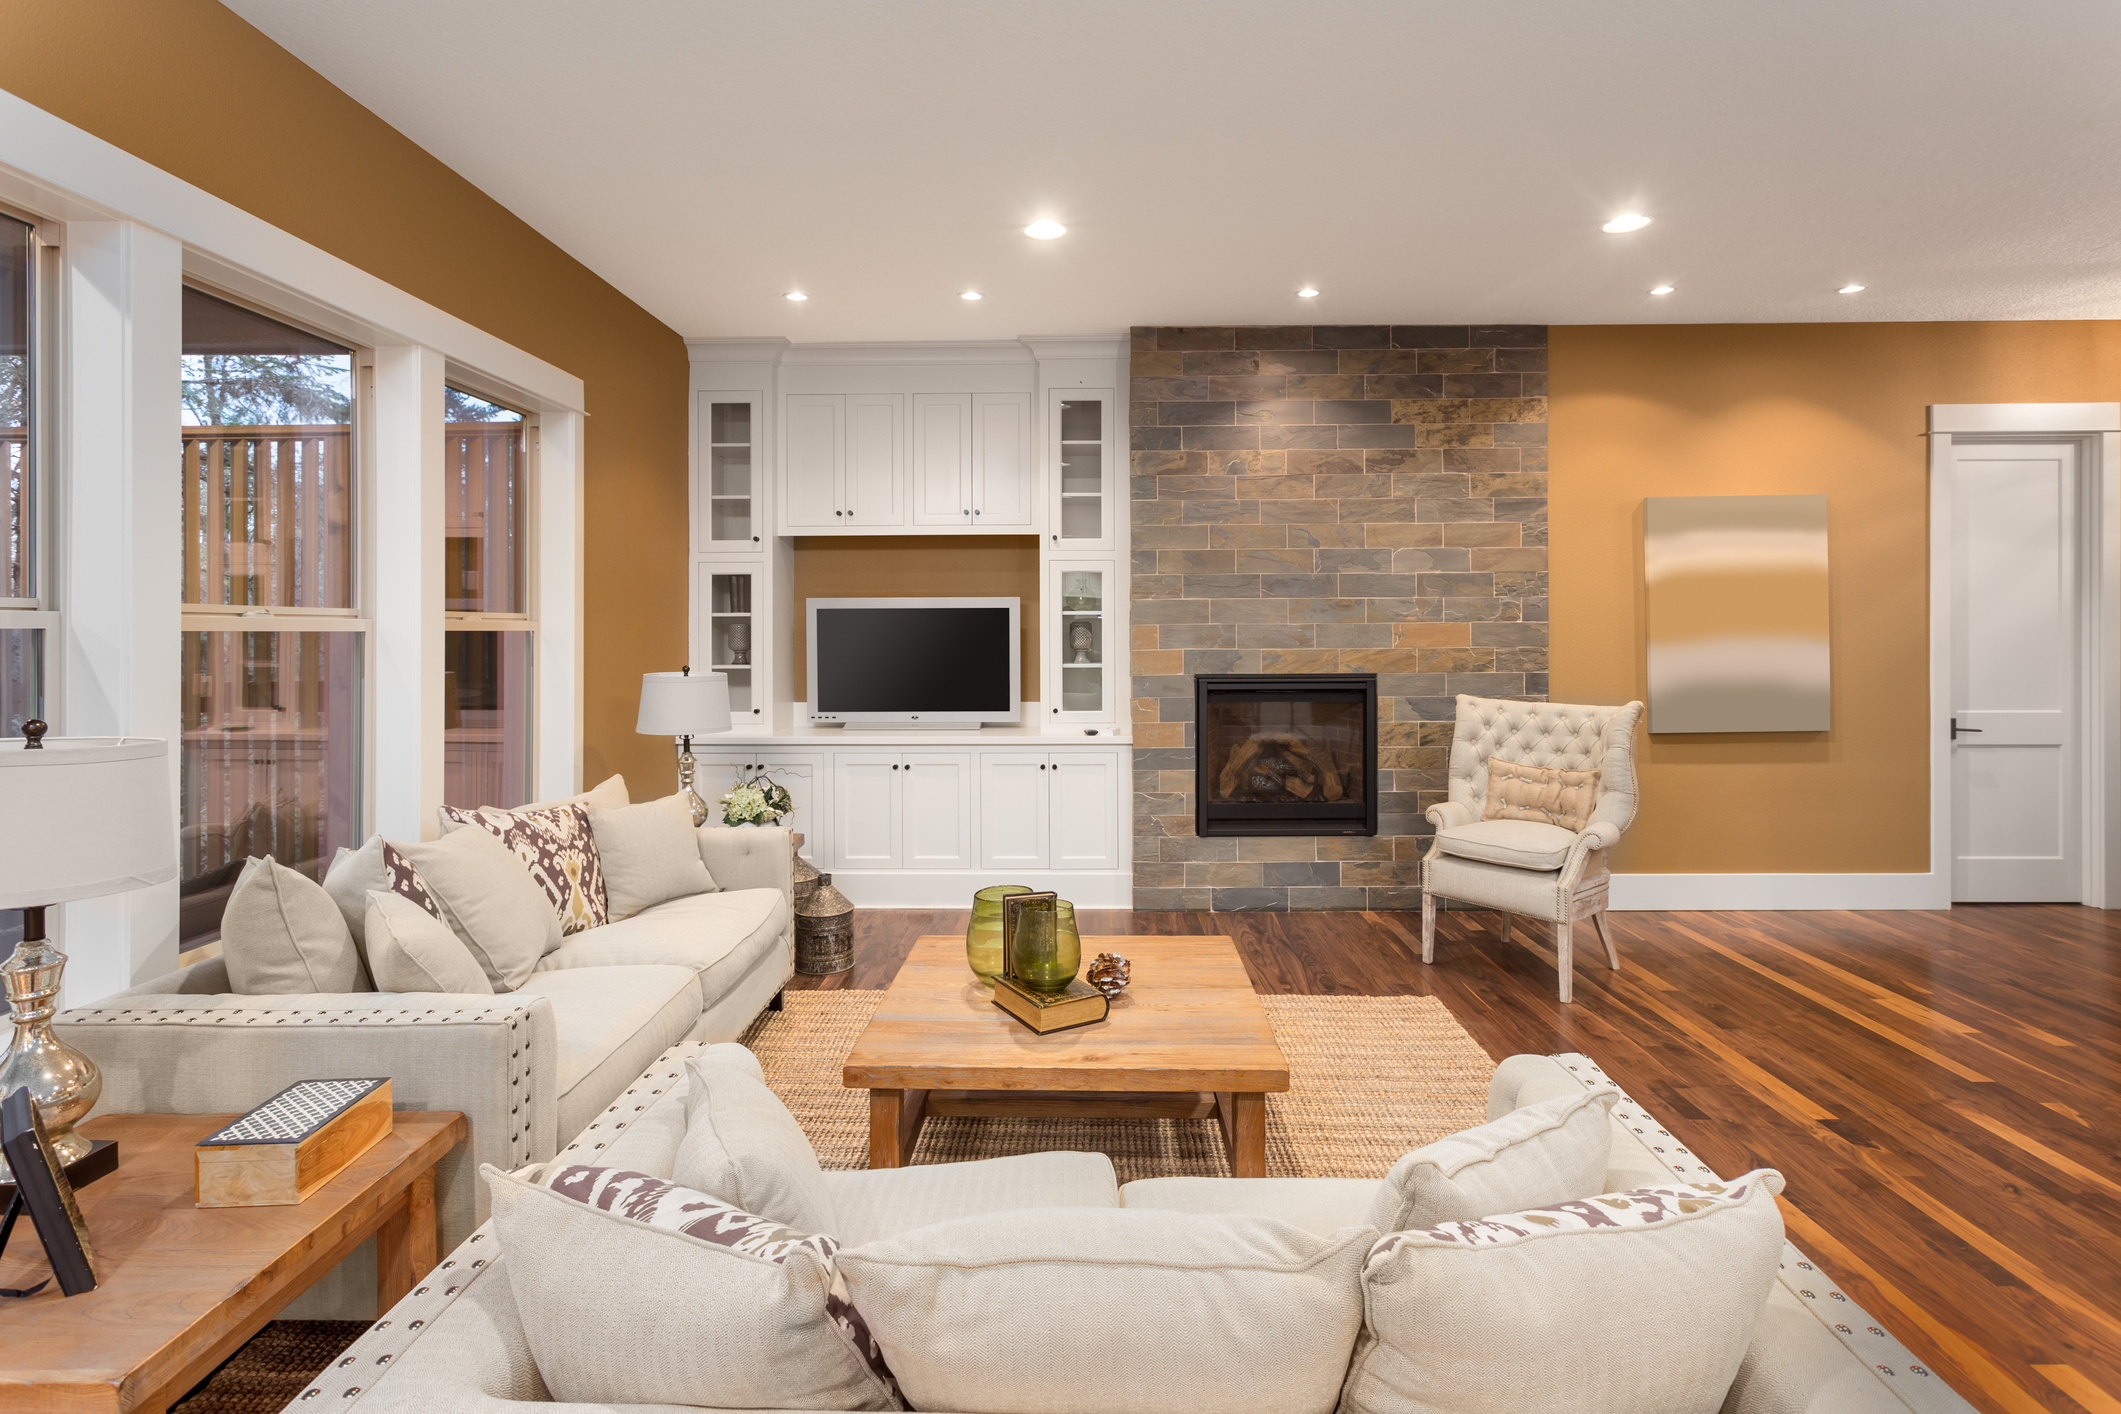 Beautiful living room interior with hardwood floors and fireplace in new luxury home. Two couches at right angles and pillows frame cozy family room with coffee table and built-in cabinets.